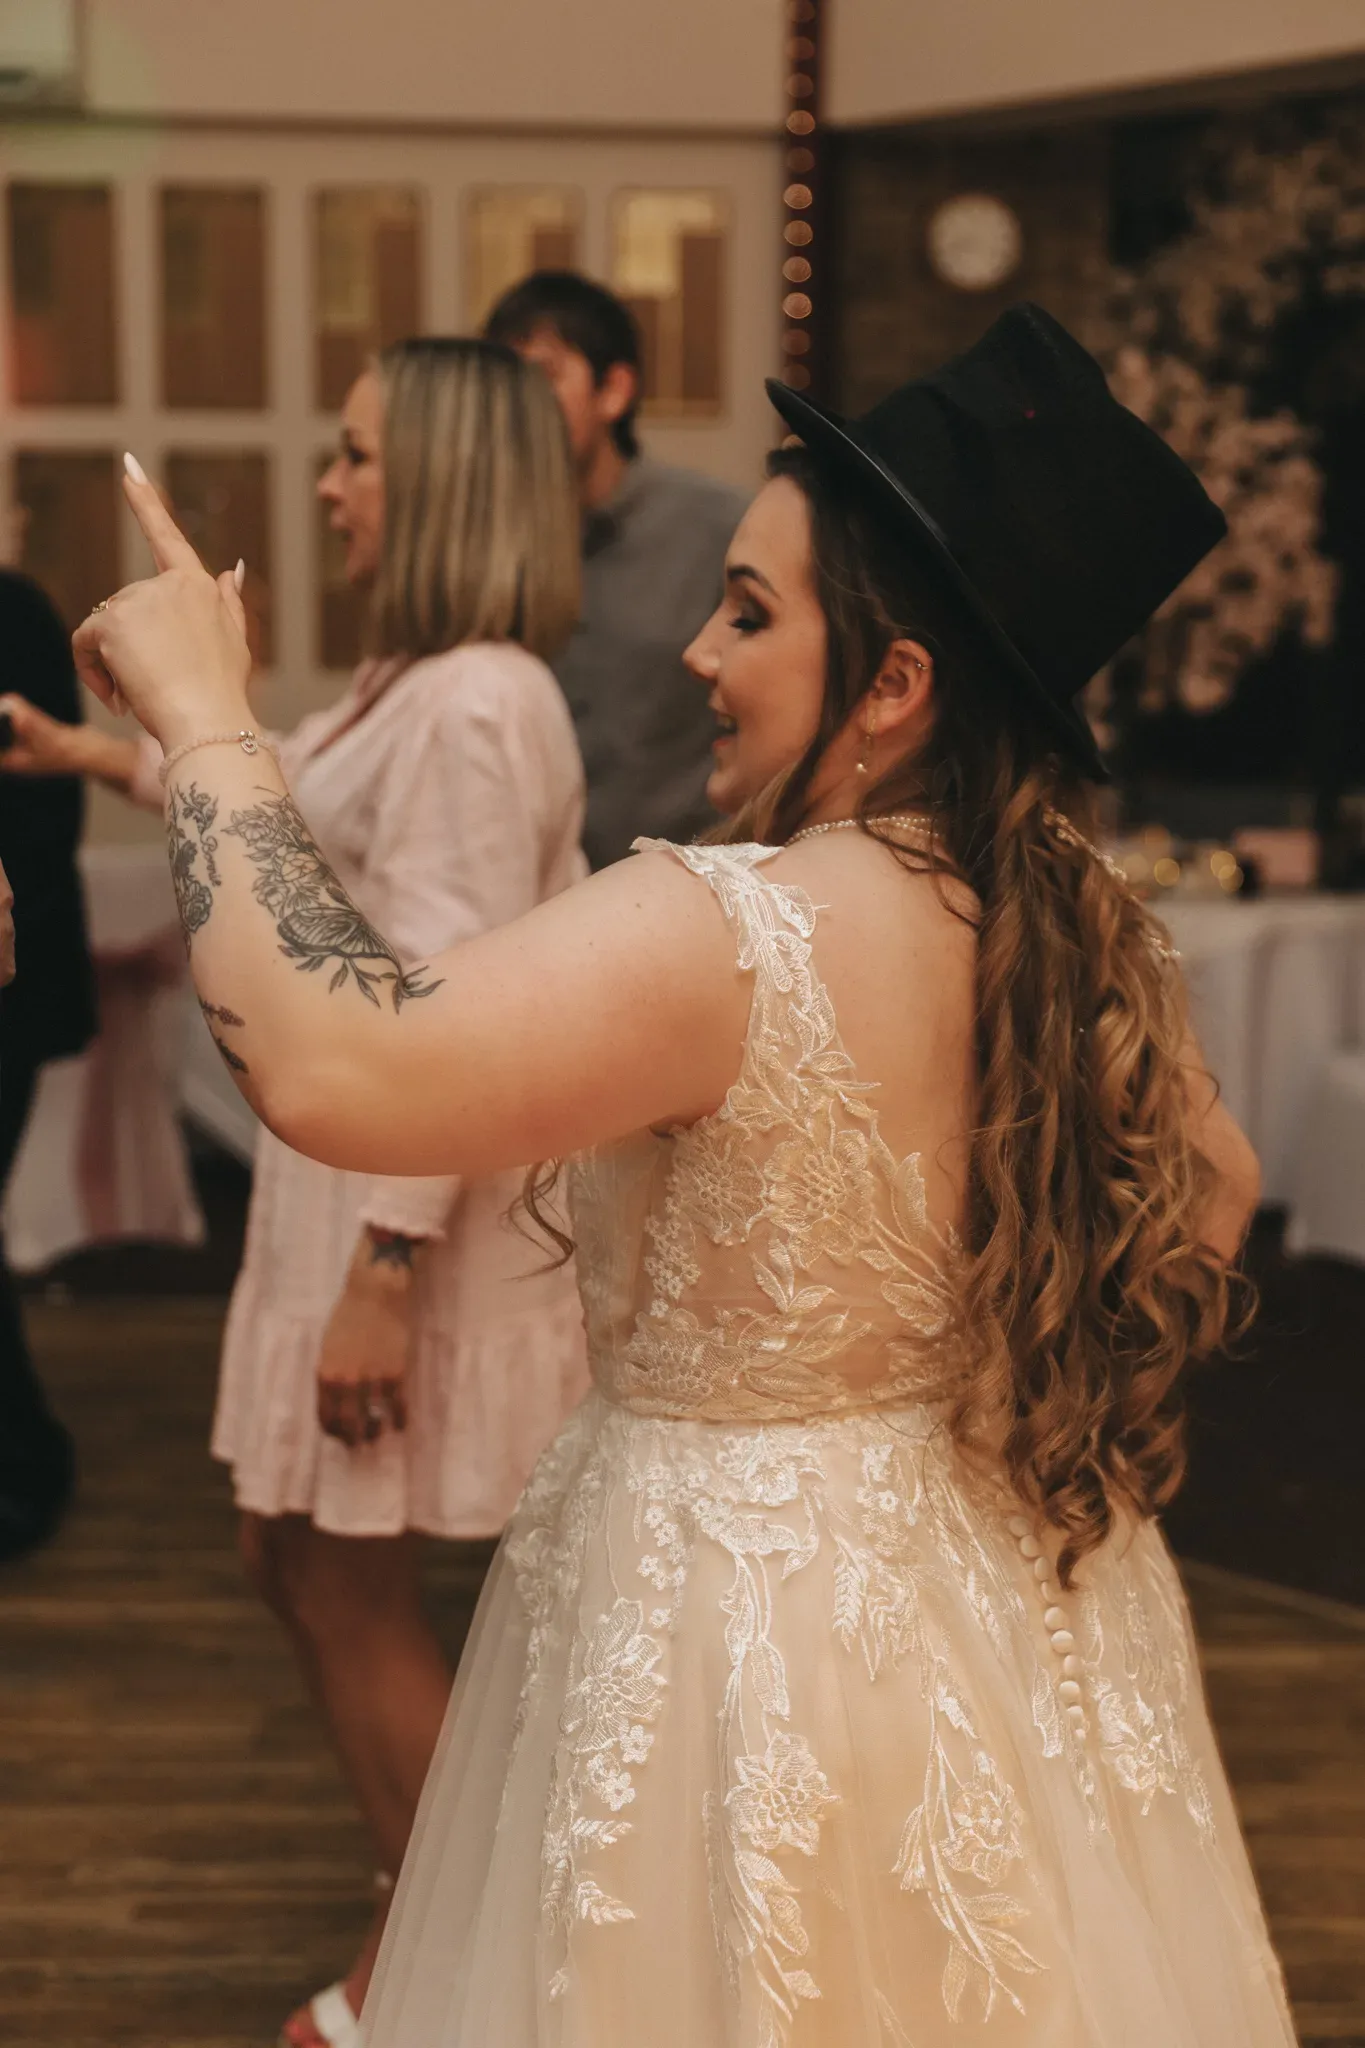 A woman in a detailed white lace dress and a black top hat interacts with her phone, likely taking a photo, at a lively indoor gathering with other guests chatting in the background.